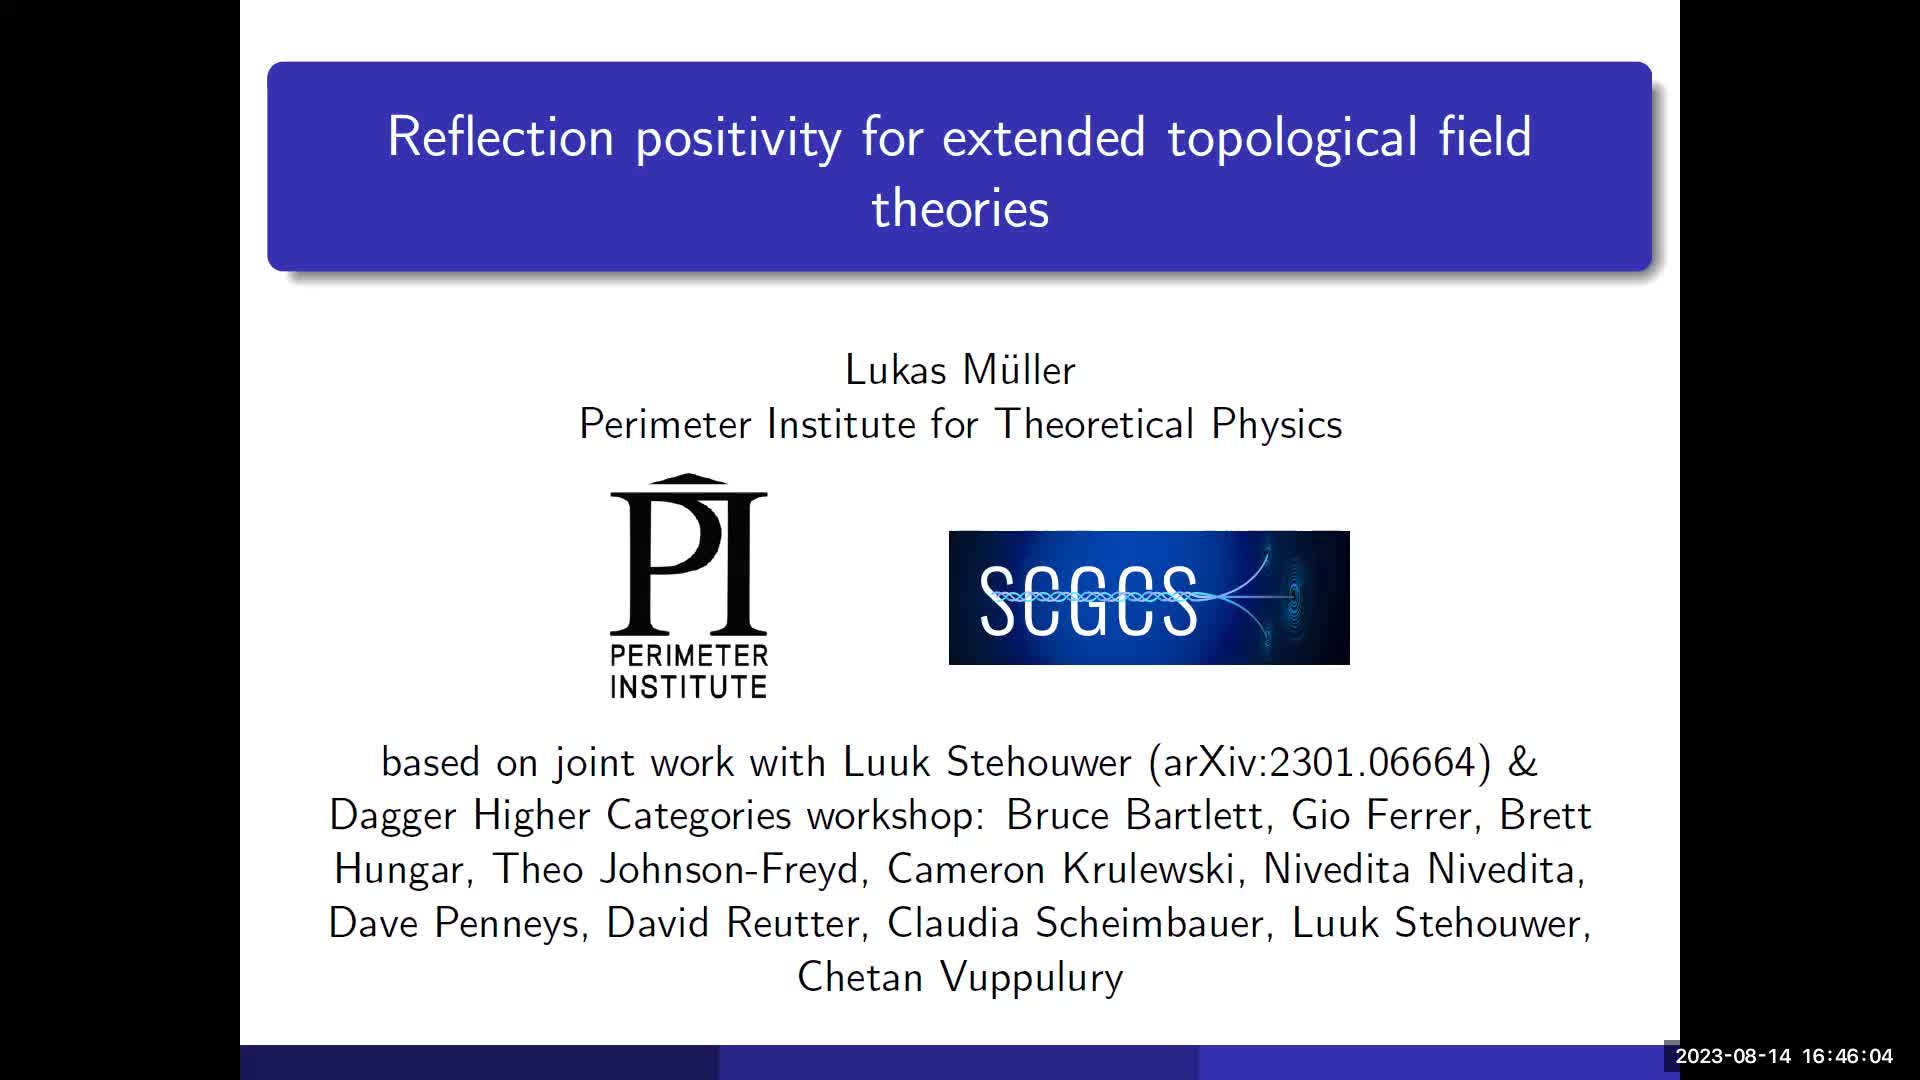 Lukas Müller - Reflection positivity for extended topological field theories